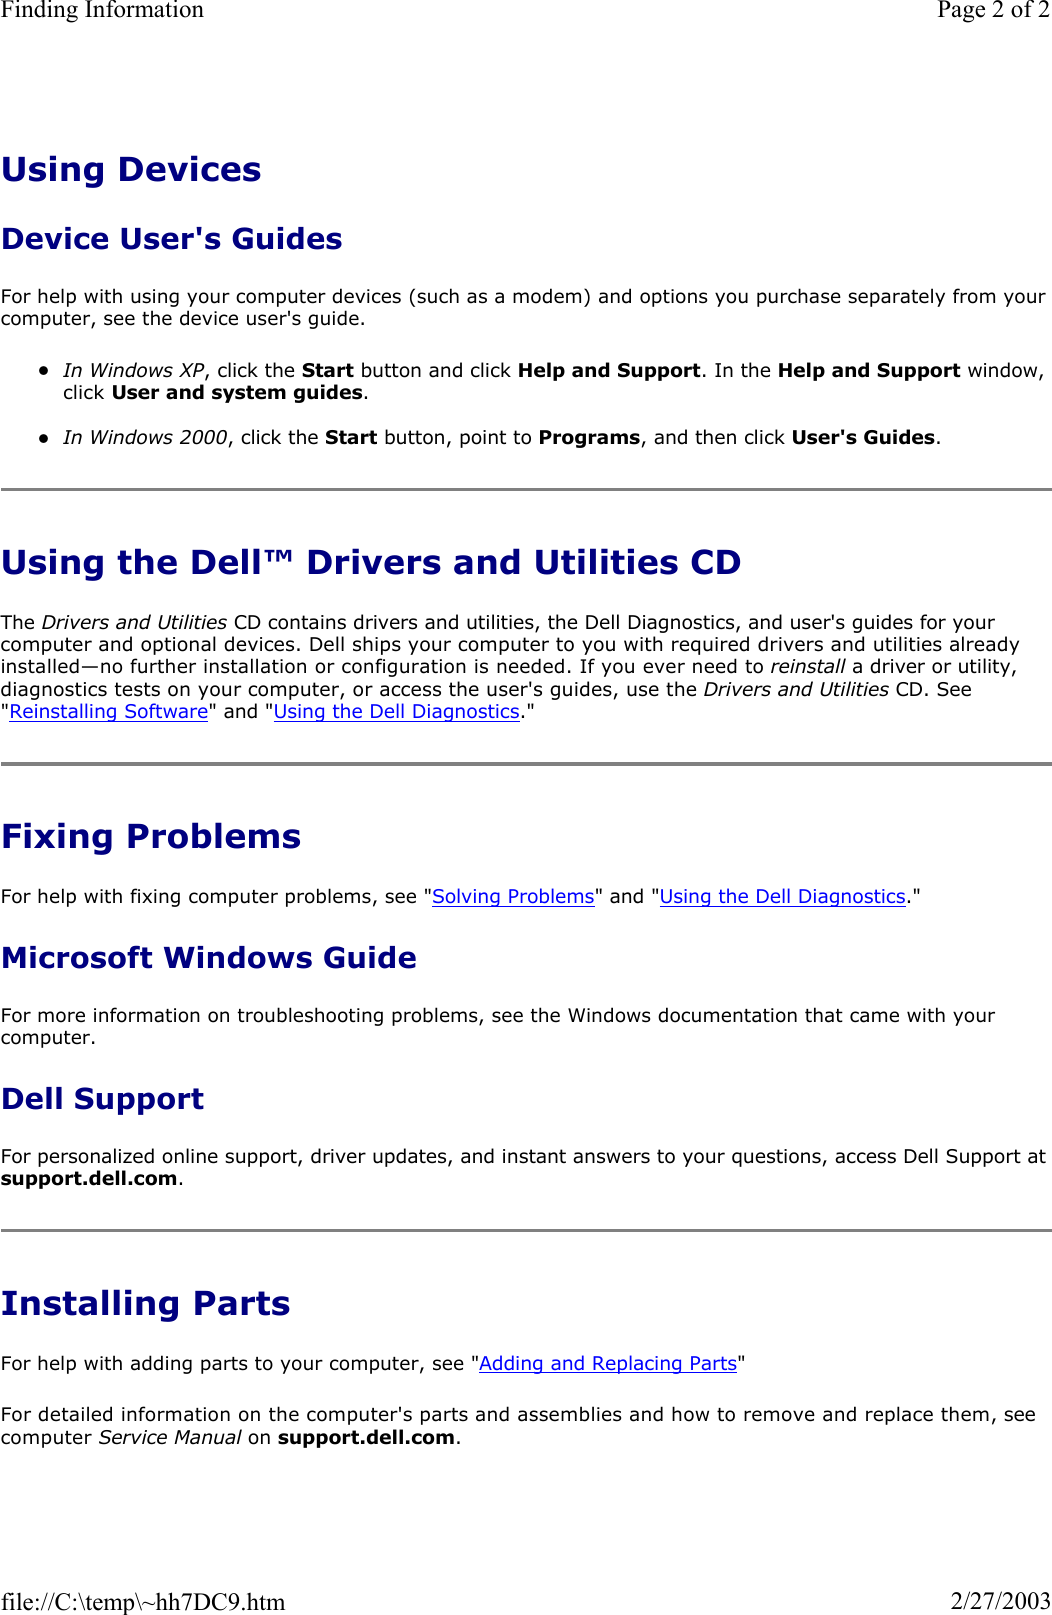 Using Devices Device User&apos;s Guides For help with using your computer devices (such as a modem) and options you purchase separately from your computer, see the device user&apos;s guide. zIn Windows XP, click the Start button and click Help and Support. In the Help and Support window, click User and system guides.zIn Windows 2000, click the Start button, point to Programs, and then click User&apos;s Guides.Using the Dell™ Drivers and Utilities CD The Drivers and Utilities CD contains drivers and utilities, the Dell Diagnostics, and user&apos;s guides for your computer and optional devices. Dell ships your computer to you with required drivers and utilities already installed—no further installation or configuration is needed. If you ever need to reinstall a driver or utility, diagnostics tests on your computer, or access the user&apos;s guides, use the Drivers and Utilities CD. See &quot;Reinstalling Software&quot; and &quot;Using the Dell Diagnostics.&quot; Fixing Problems For help with fixing computer problems, see &quot;Solving Problems&quot; and &quot;Using the Dell Diagnostics.&quot; Microsoft Windows Guide For more information on troubleshooting problems, see the Windows documentation that came with your computer. Dell Support For personalized online support, driver updates, and instant answers to your questions, access Dell Support at support.dell.com.Installing Parts For help with adding parts to your computer, see &quot;Adding and Replacing Parts&quot;For detailed information on the computer&apos;s parts and assemblies and how to remove and replace them, seecomputer Service Manual on support.dell.com.Page 2 of 2Finding Information2/27/2003file://C:\temp\~hh7DC9.htm